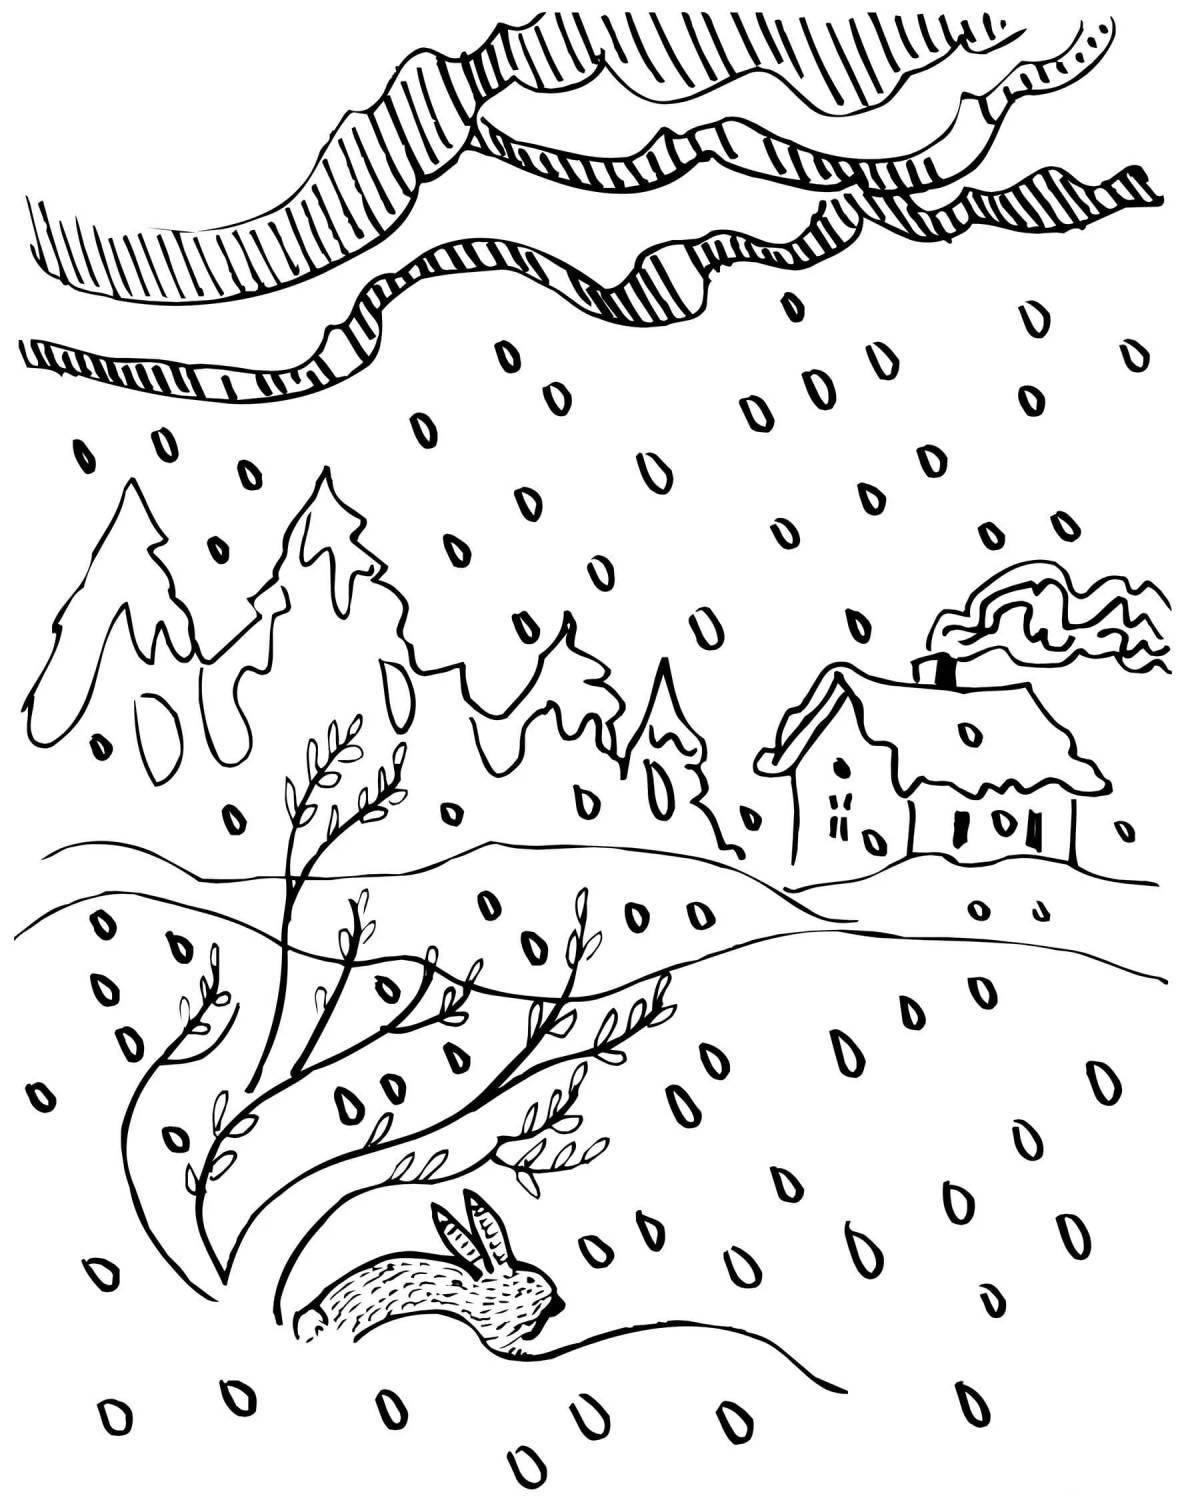 Charming snowdrift coloring book